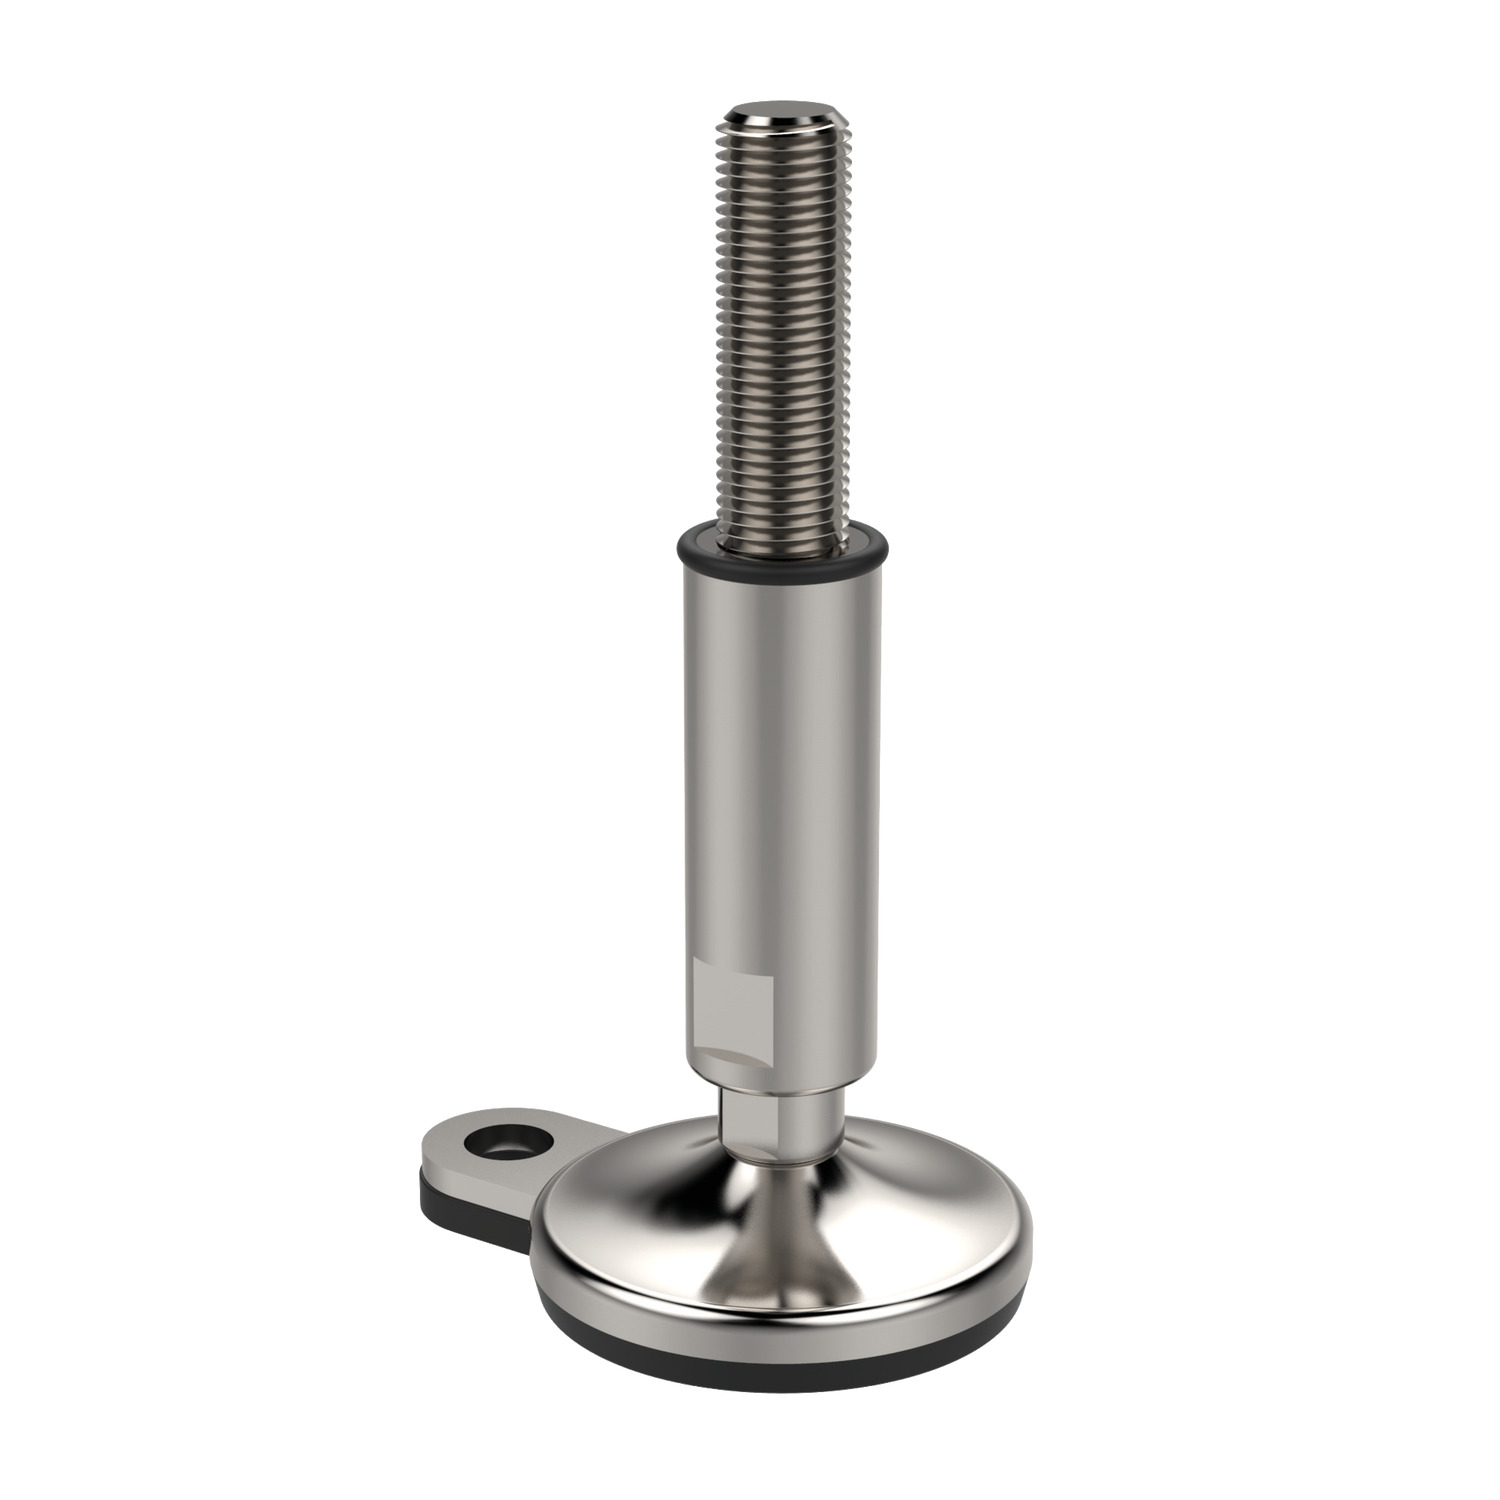 Product 34775, Hygienic Levelling Feet - Bolt Down stainless steel, with rubber pad / 